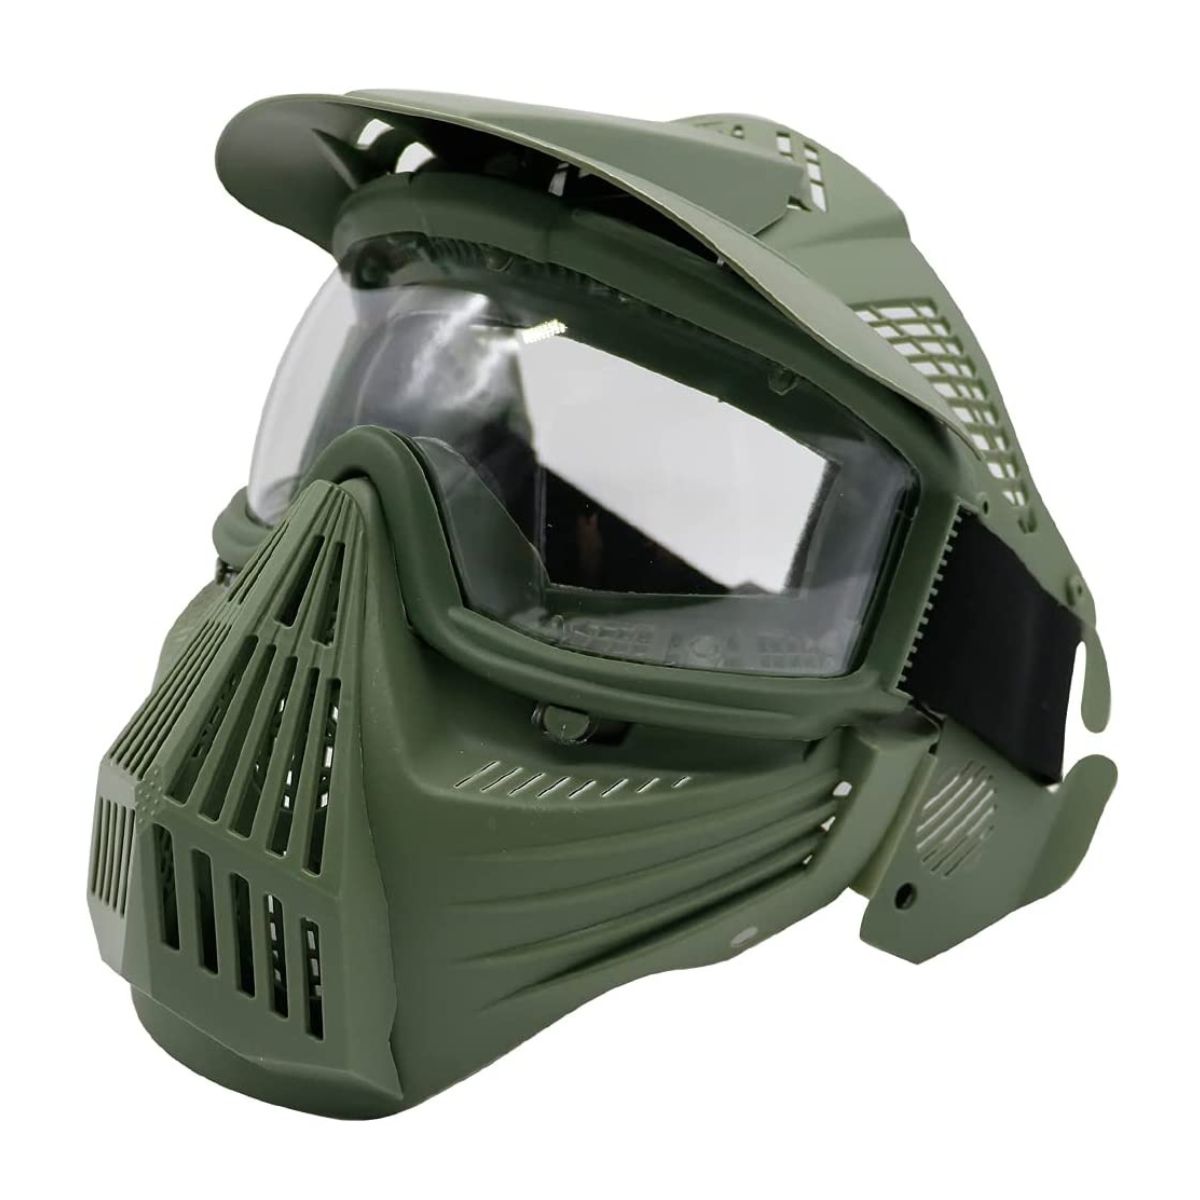 Tactical Game Mask - 44MA07 - Archery Equipment